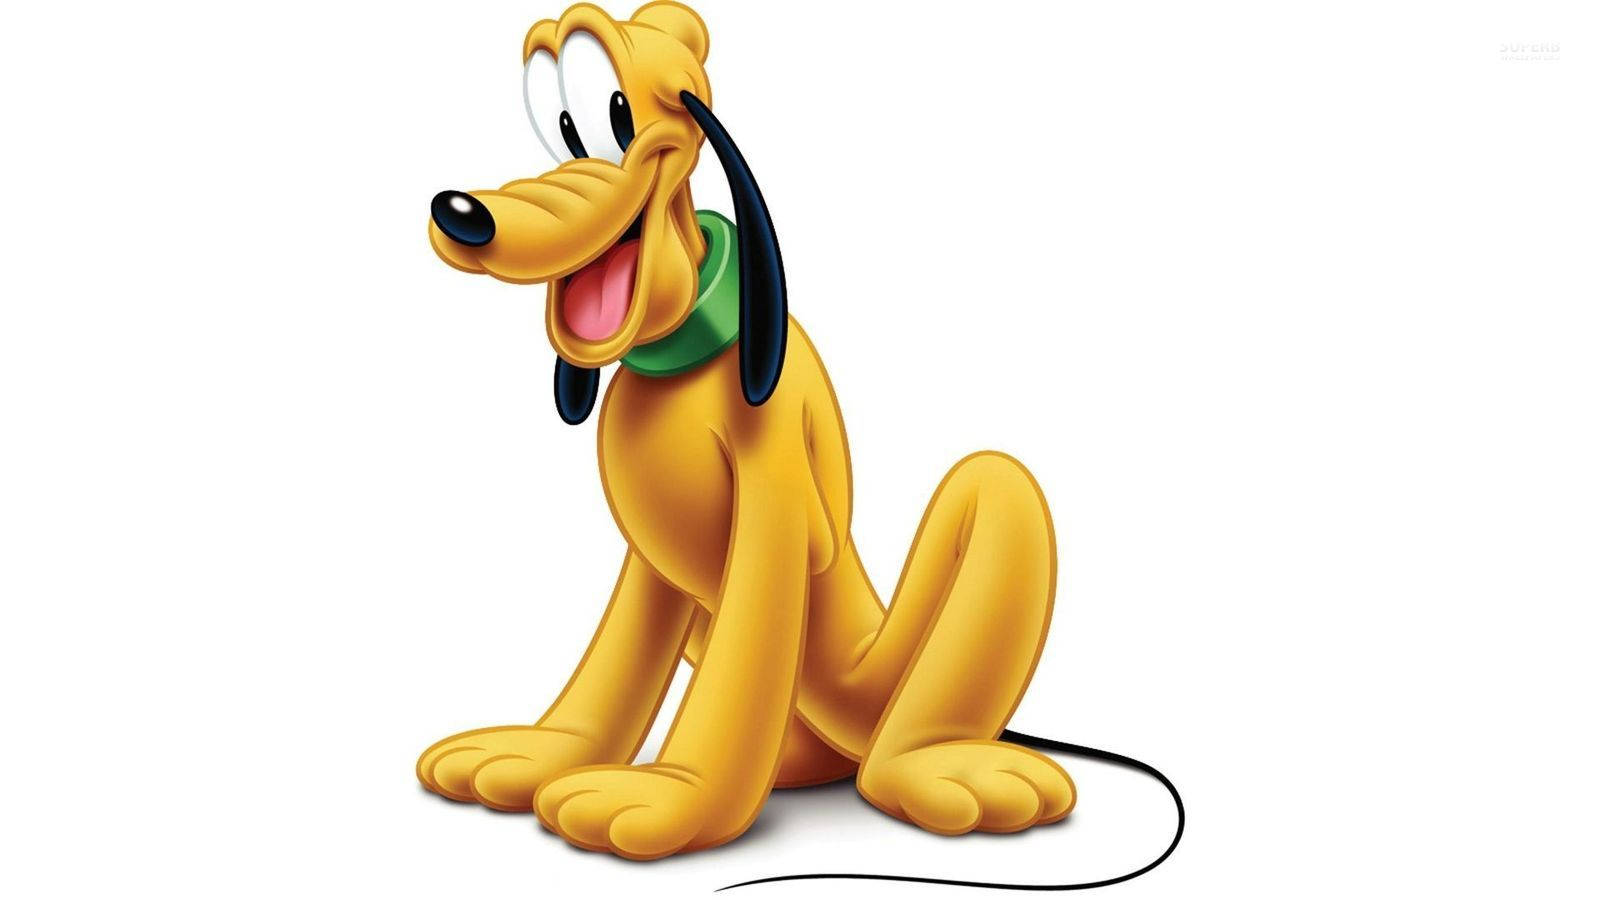 Disney's Cheerful Pluto Playing Fetch In The Green Park Wallpaper